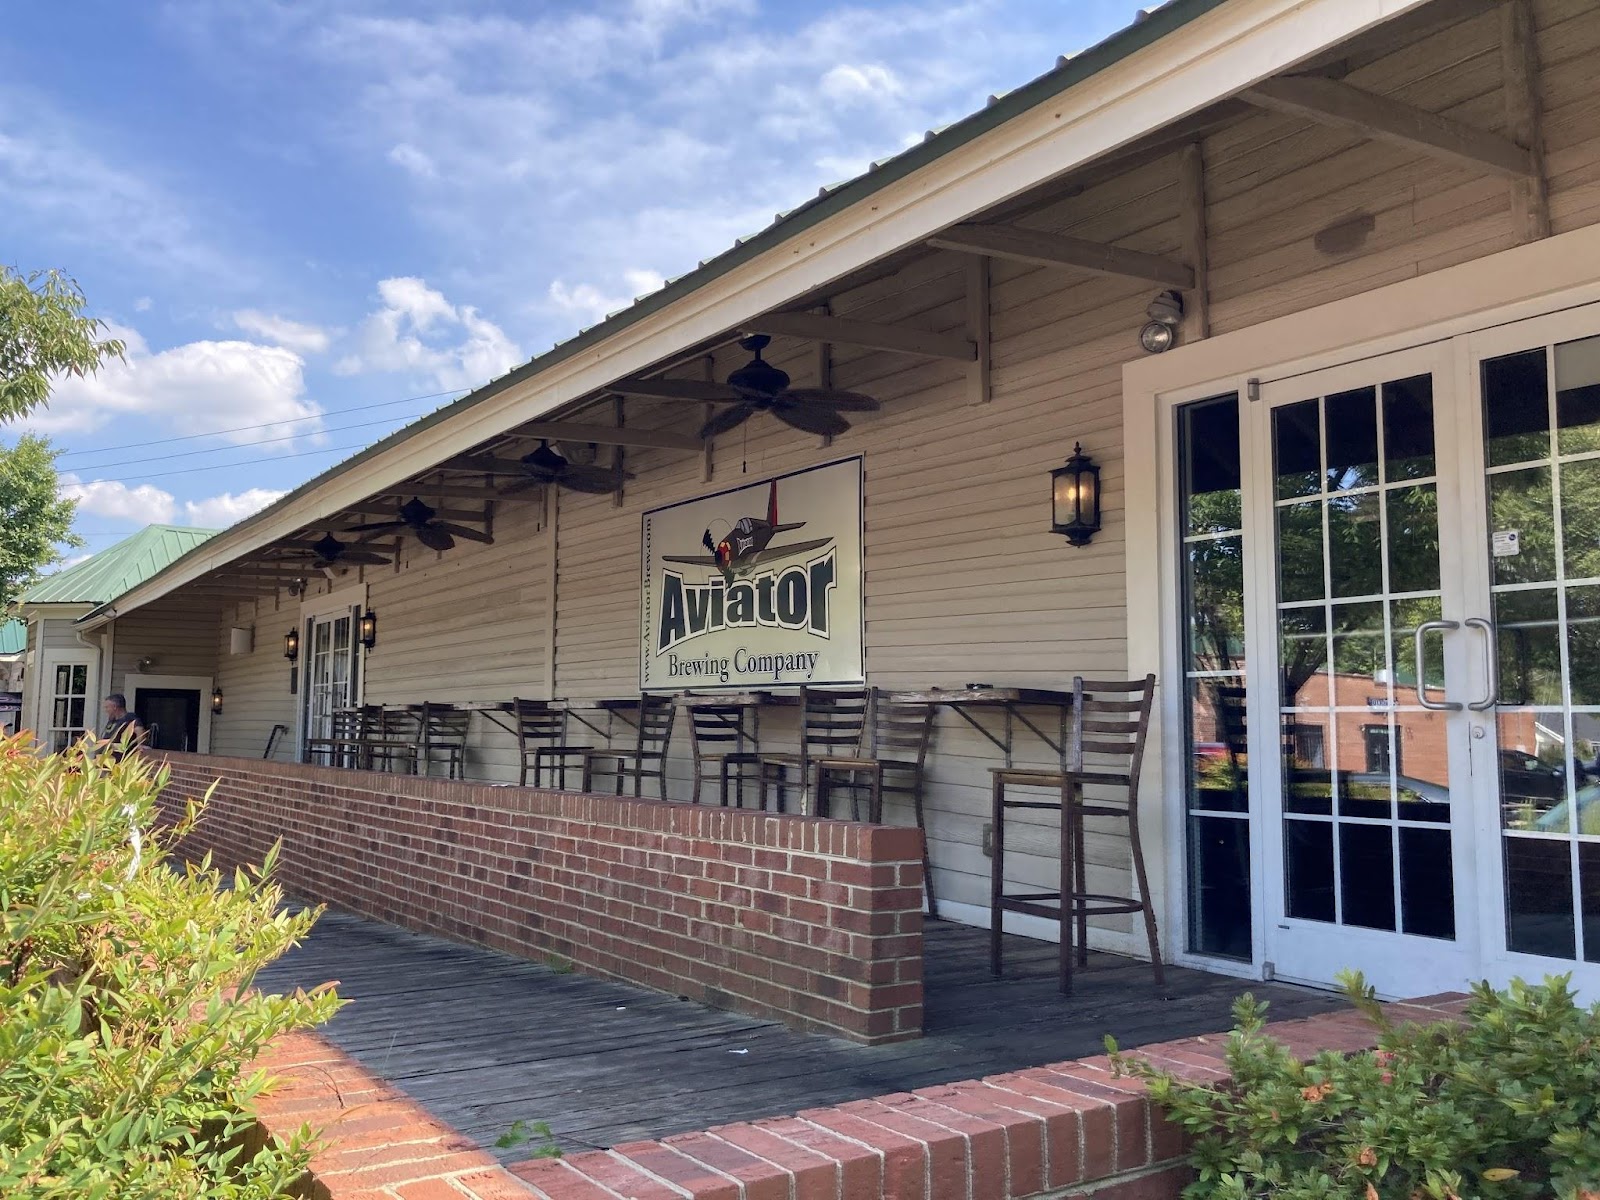 Residents of Fuquay love the Aviator Smokehouse and Brewing Company.